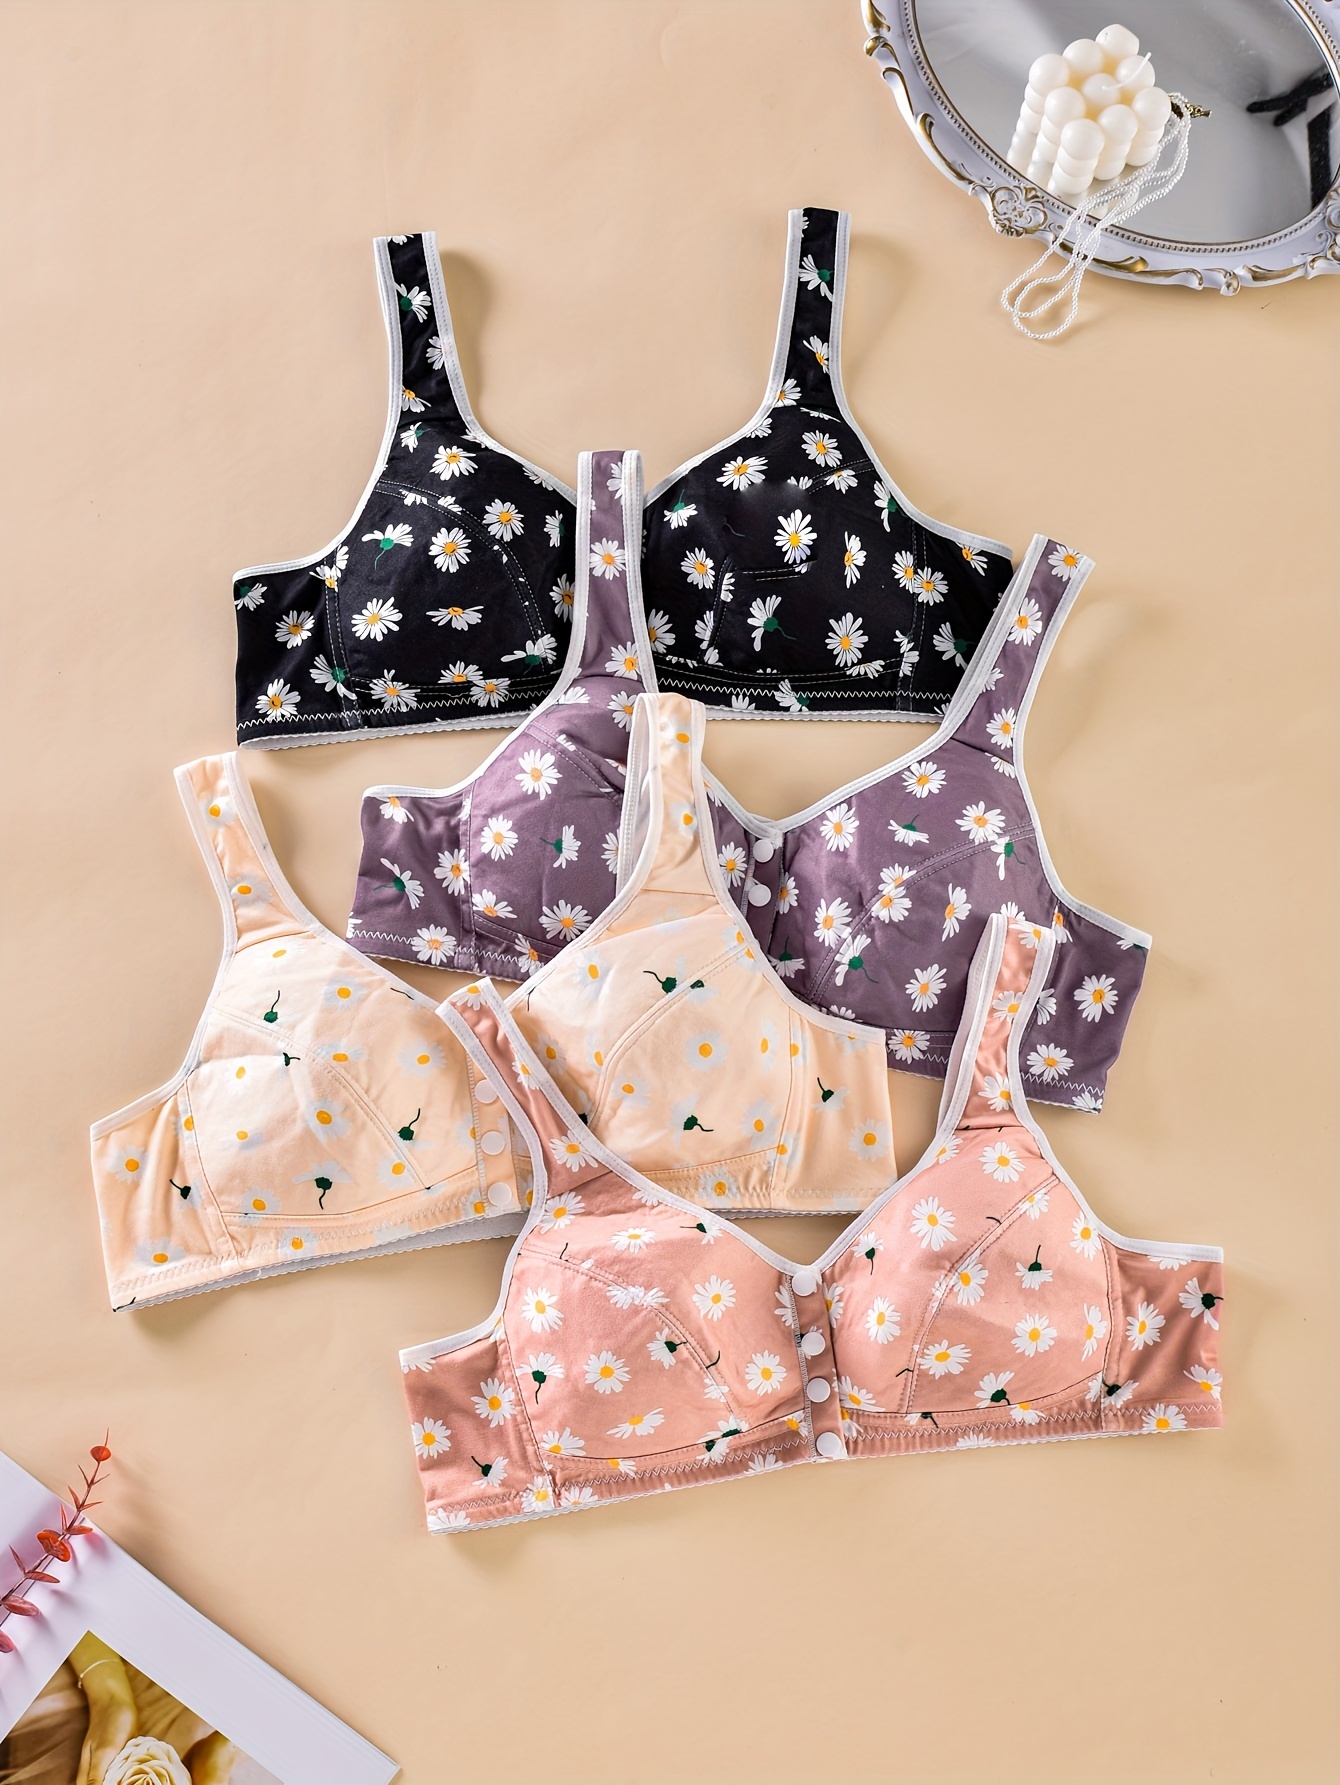 Available] Buy New Wireless Front Button Bras - Daisy Bra